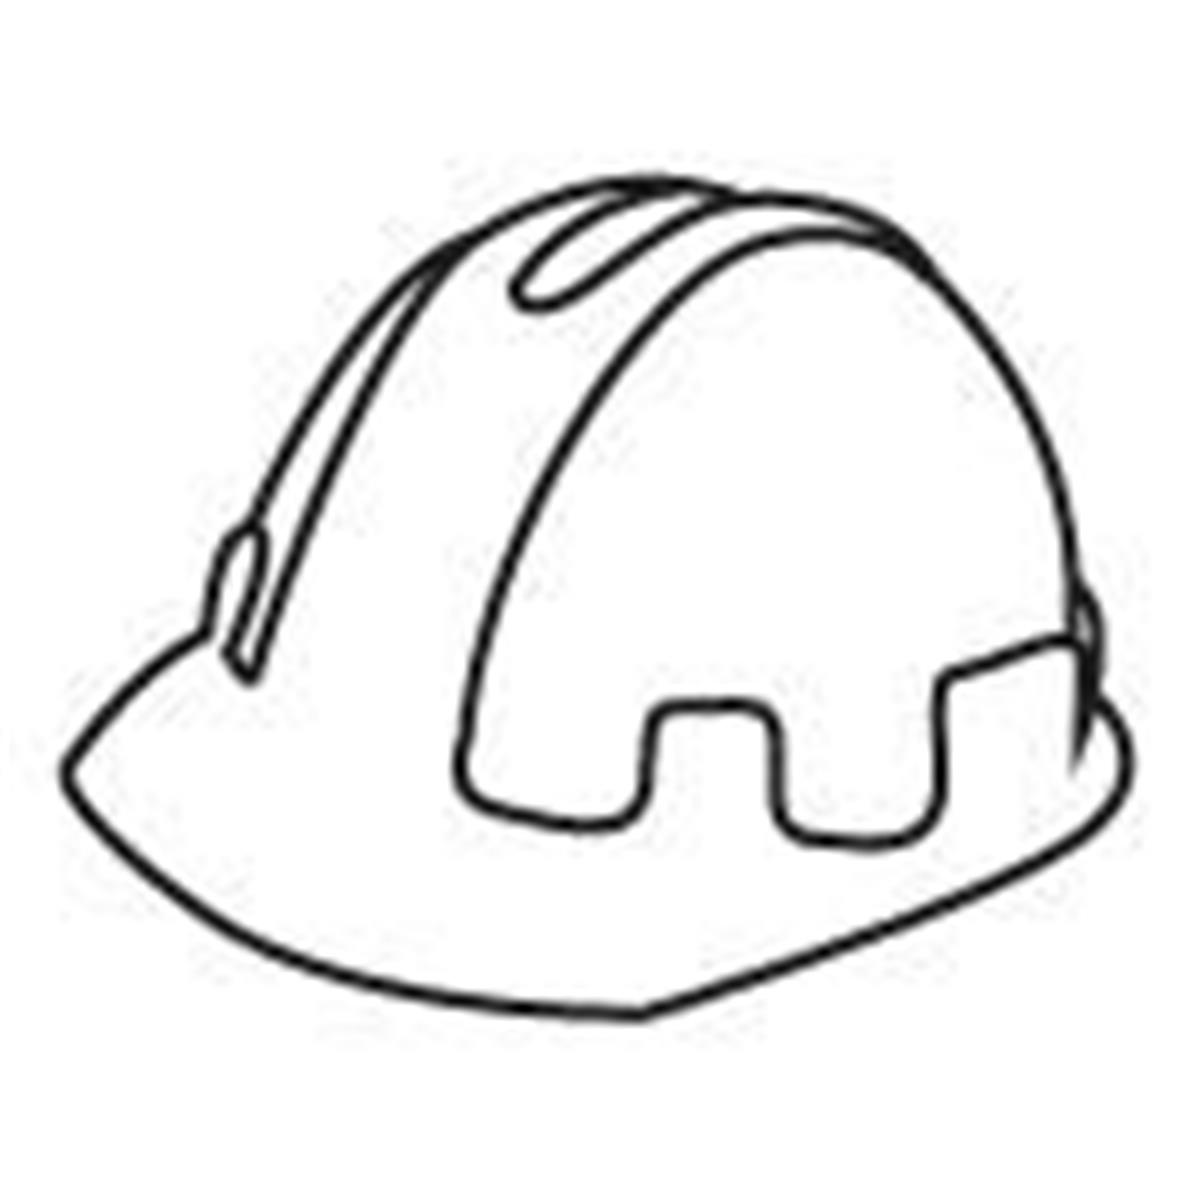 Se-0418 0.5 X 0.5 In. Incentive Stamp - Construction Hard Hat